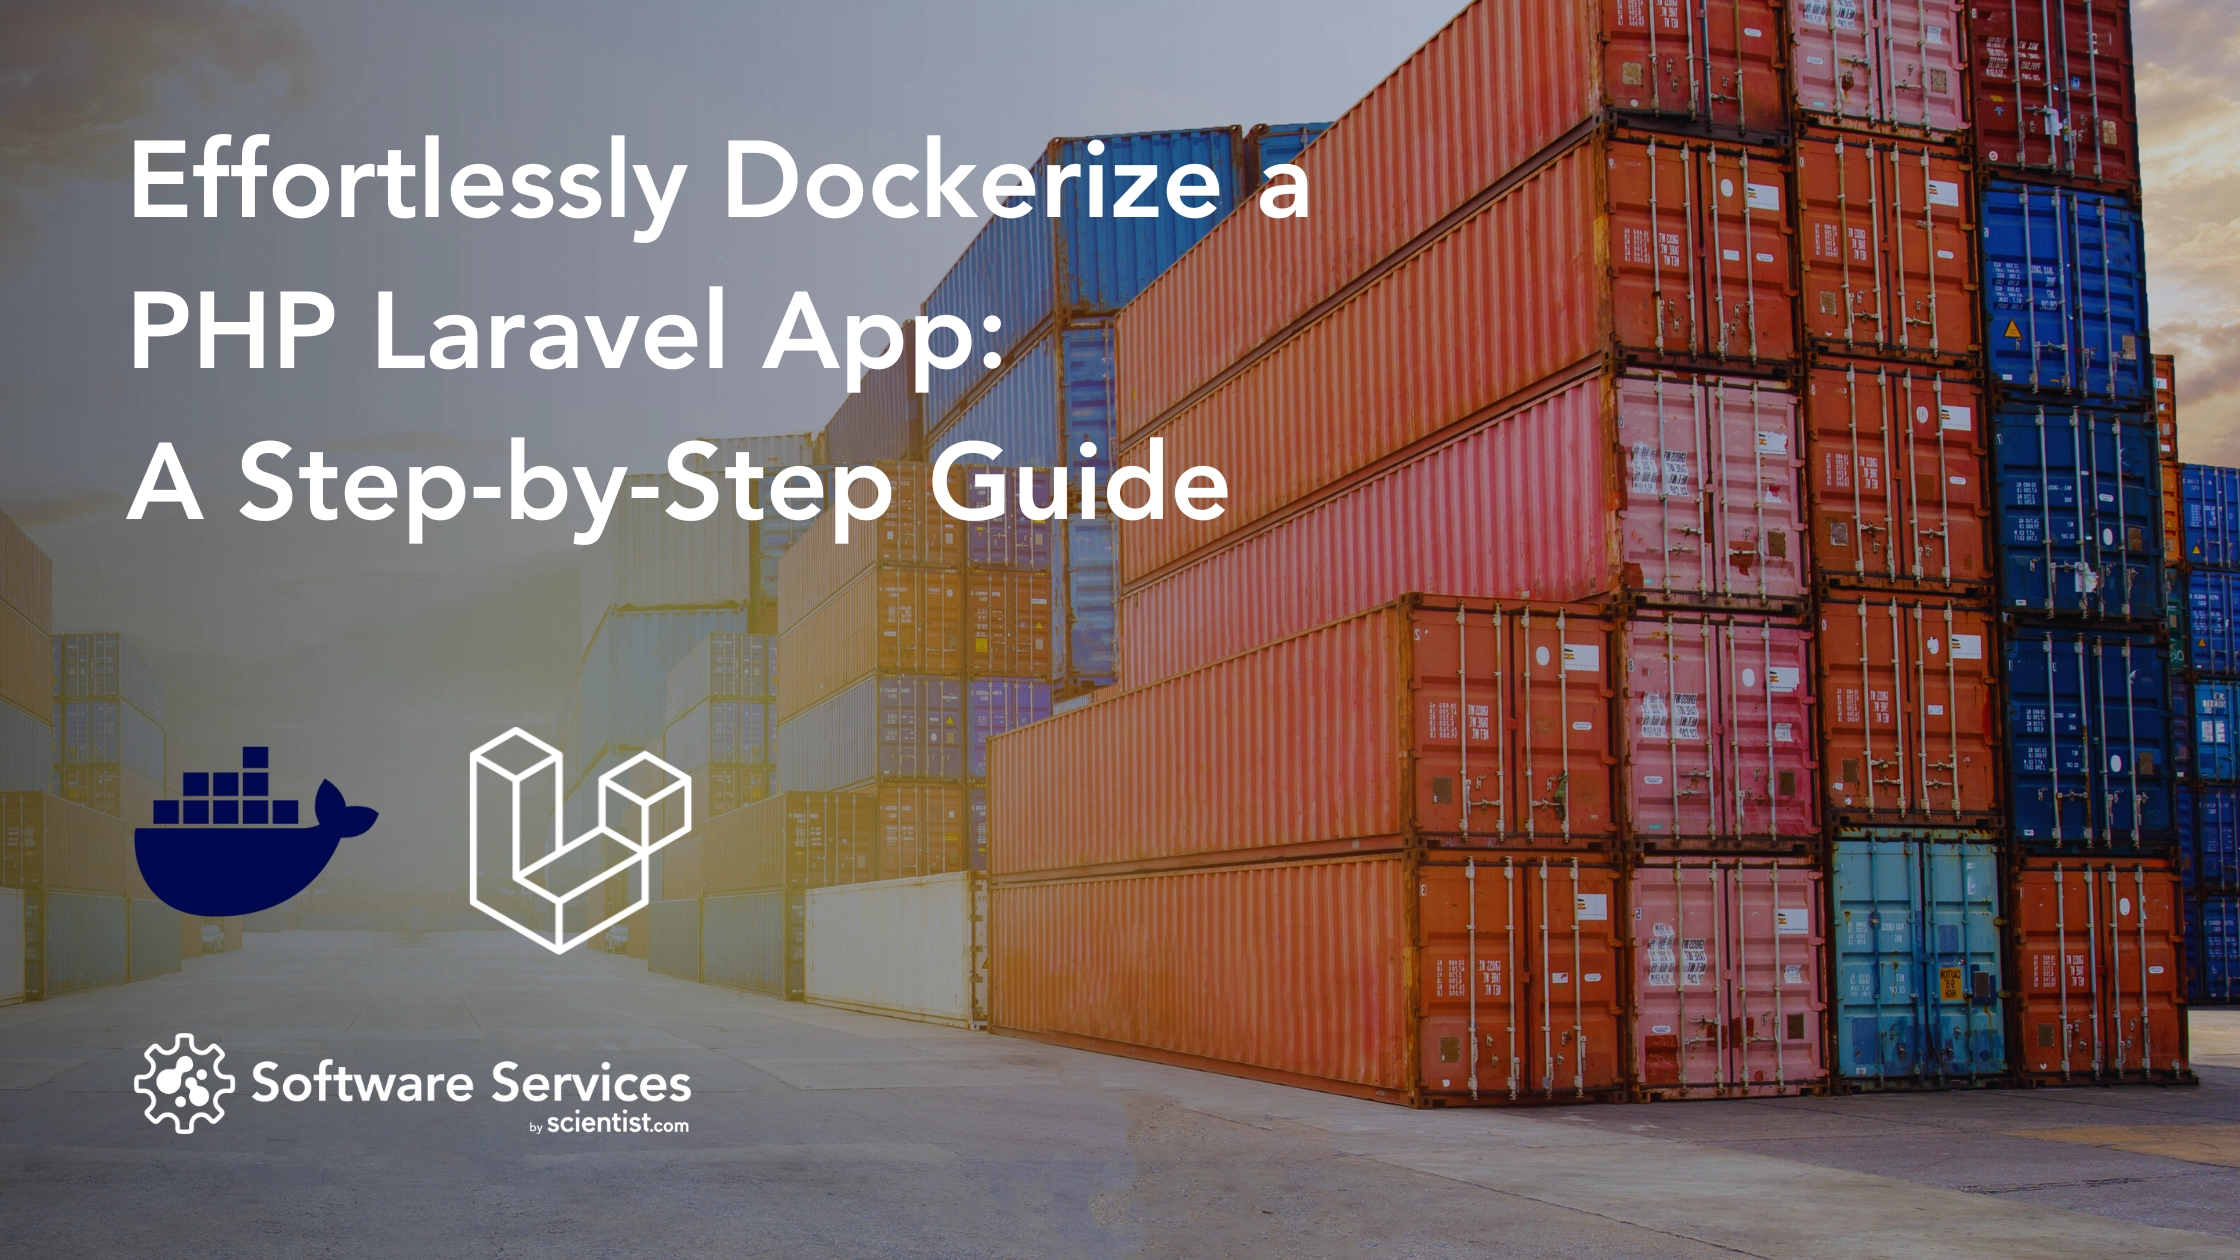 Titled: Effortlessly Dockerize Your PHP Laravel App: A Step-by-Step Guide, with background image of shipyard, on the right of the image there are shipping containers, Software Sevices by Scientist.com logo, docker logo, and php laravel logo